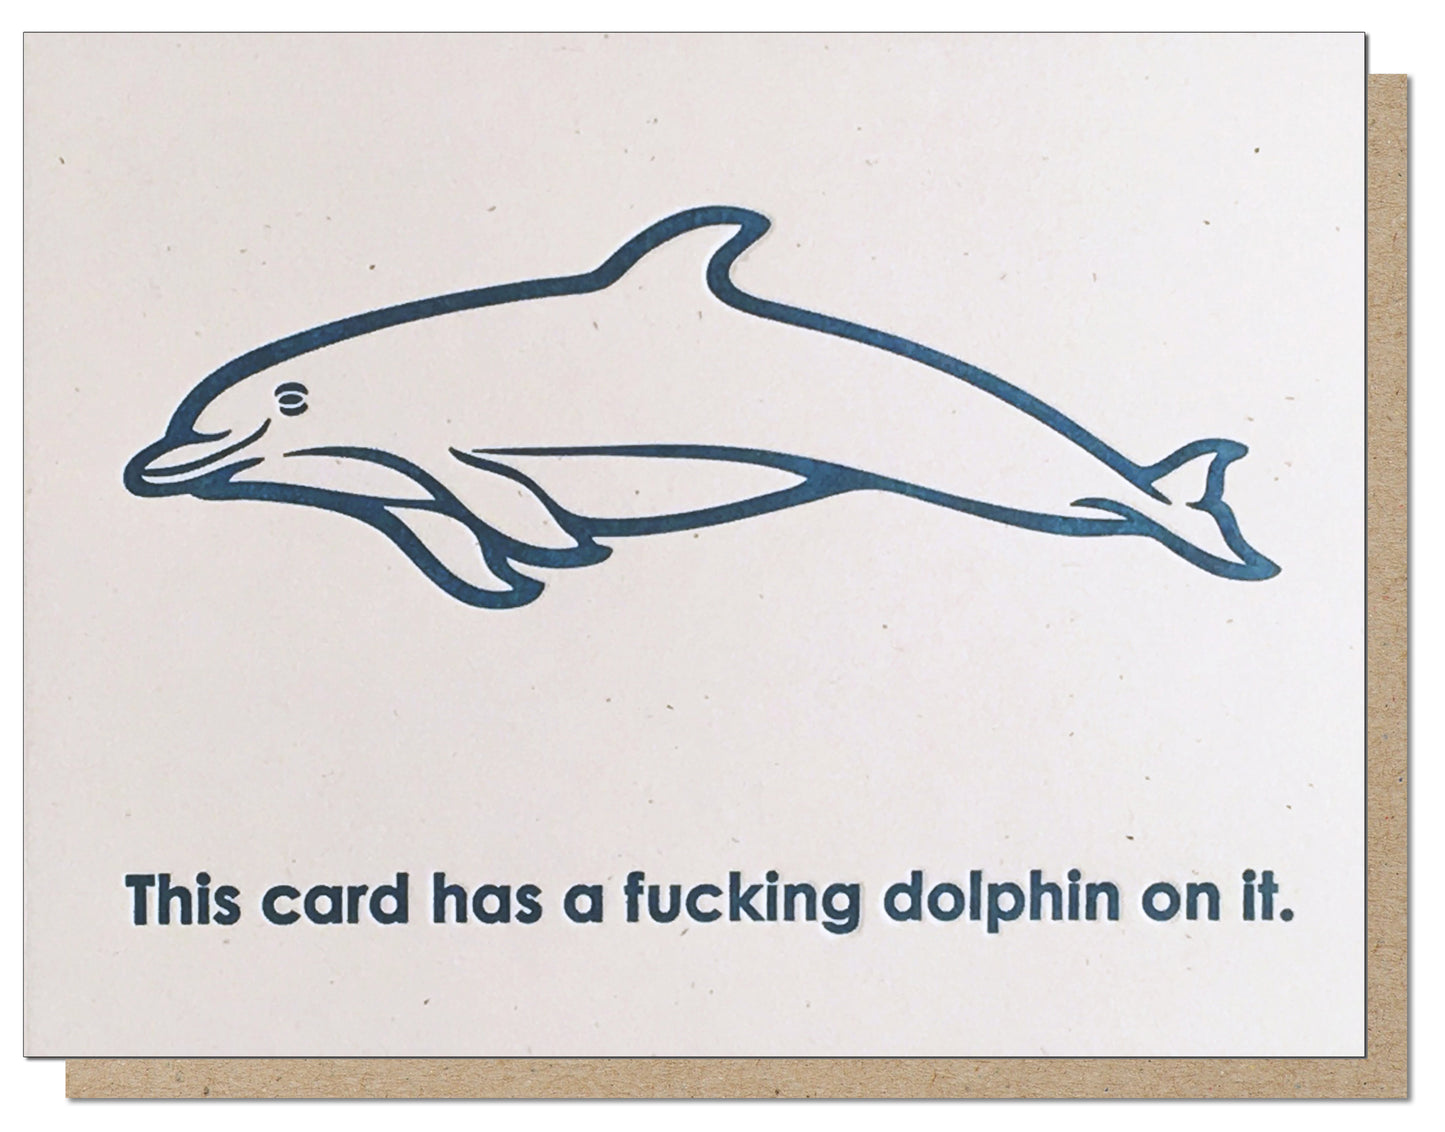 A Fucking Dolphin On It. Everyday Letterpress Card.